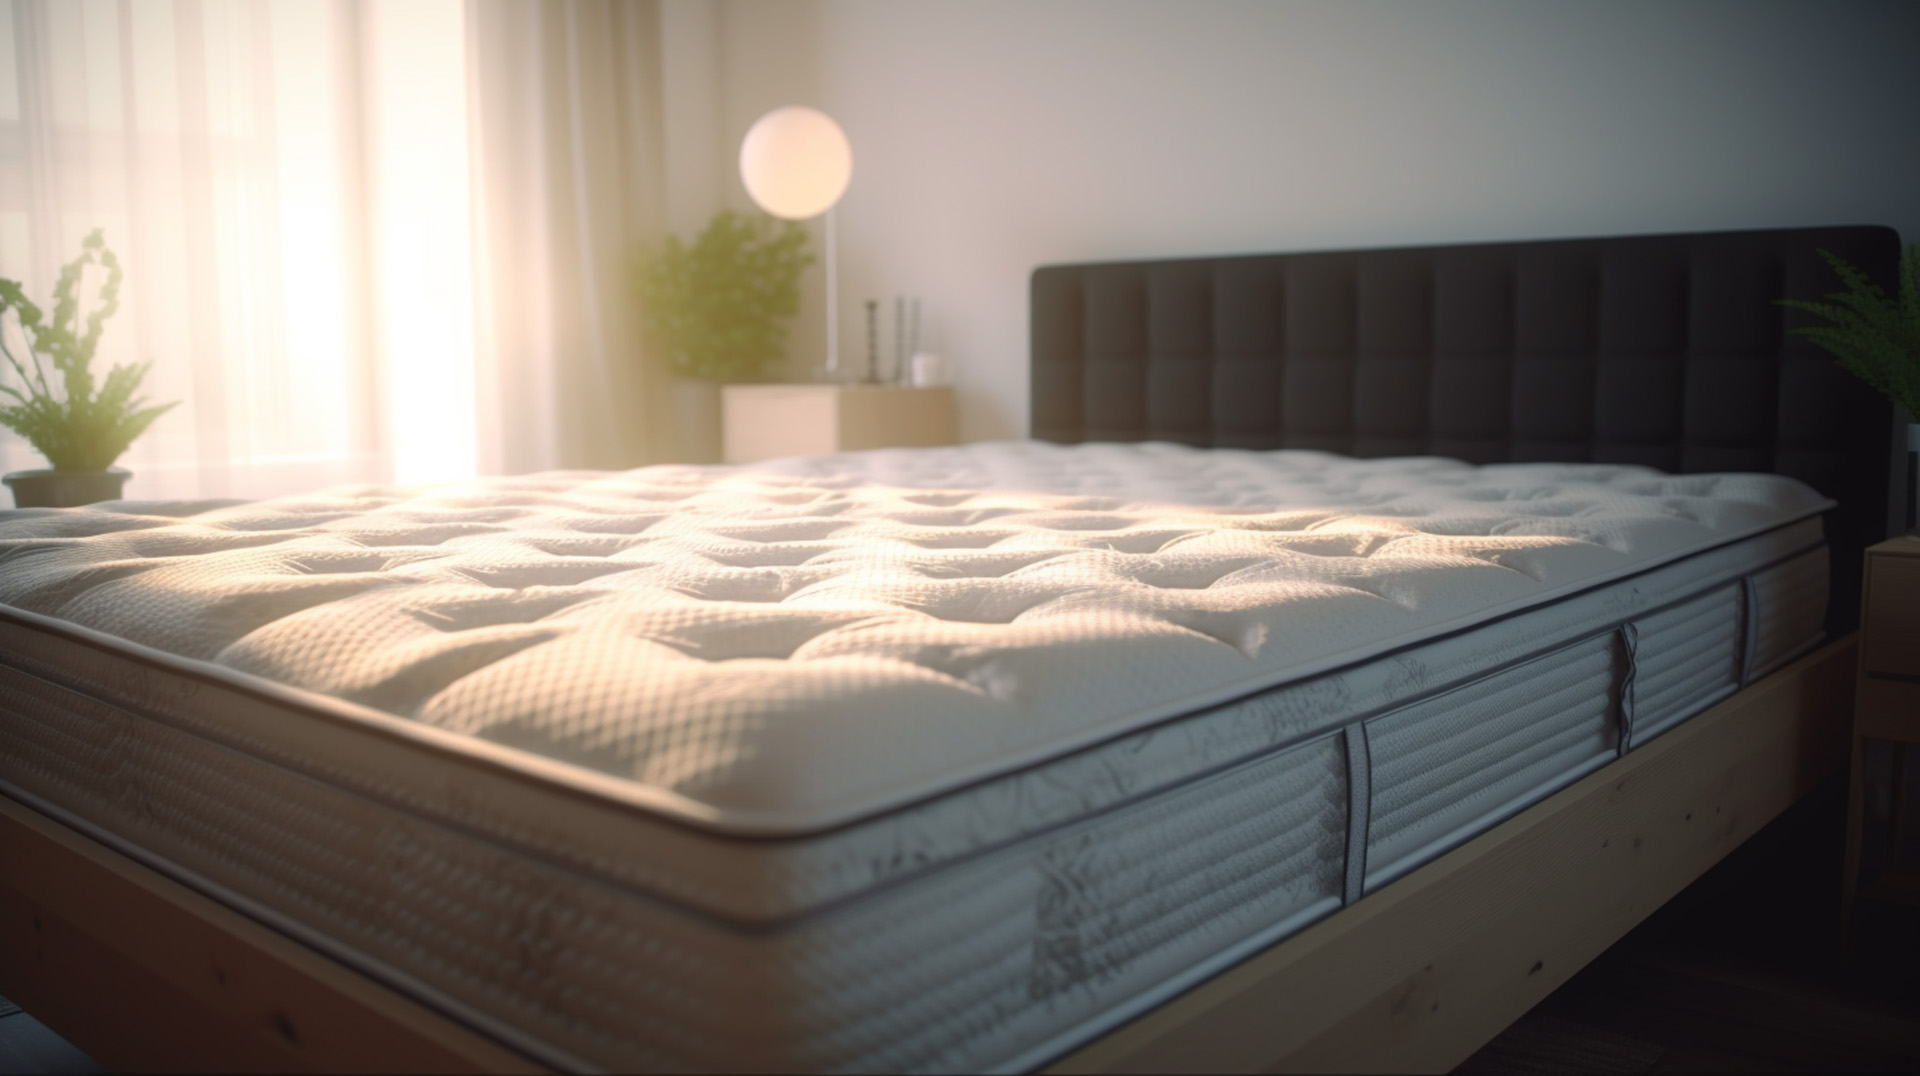 Shop Organic Mattresses and Beds in Bellevue, WA